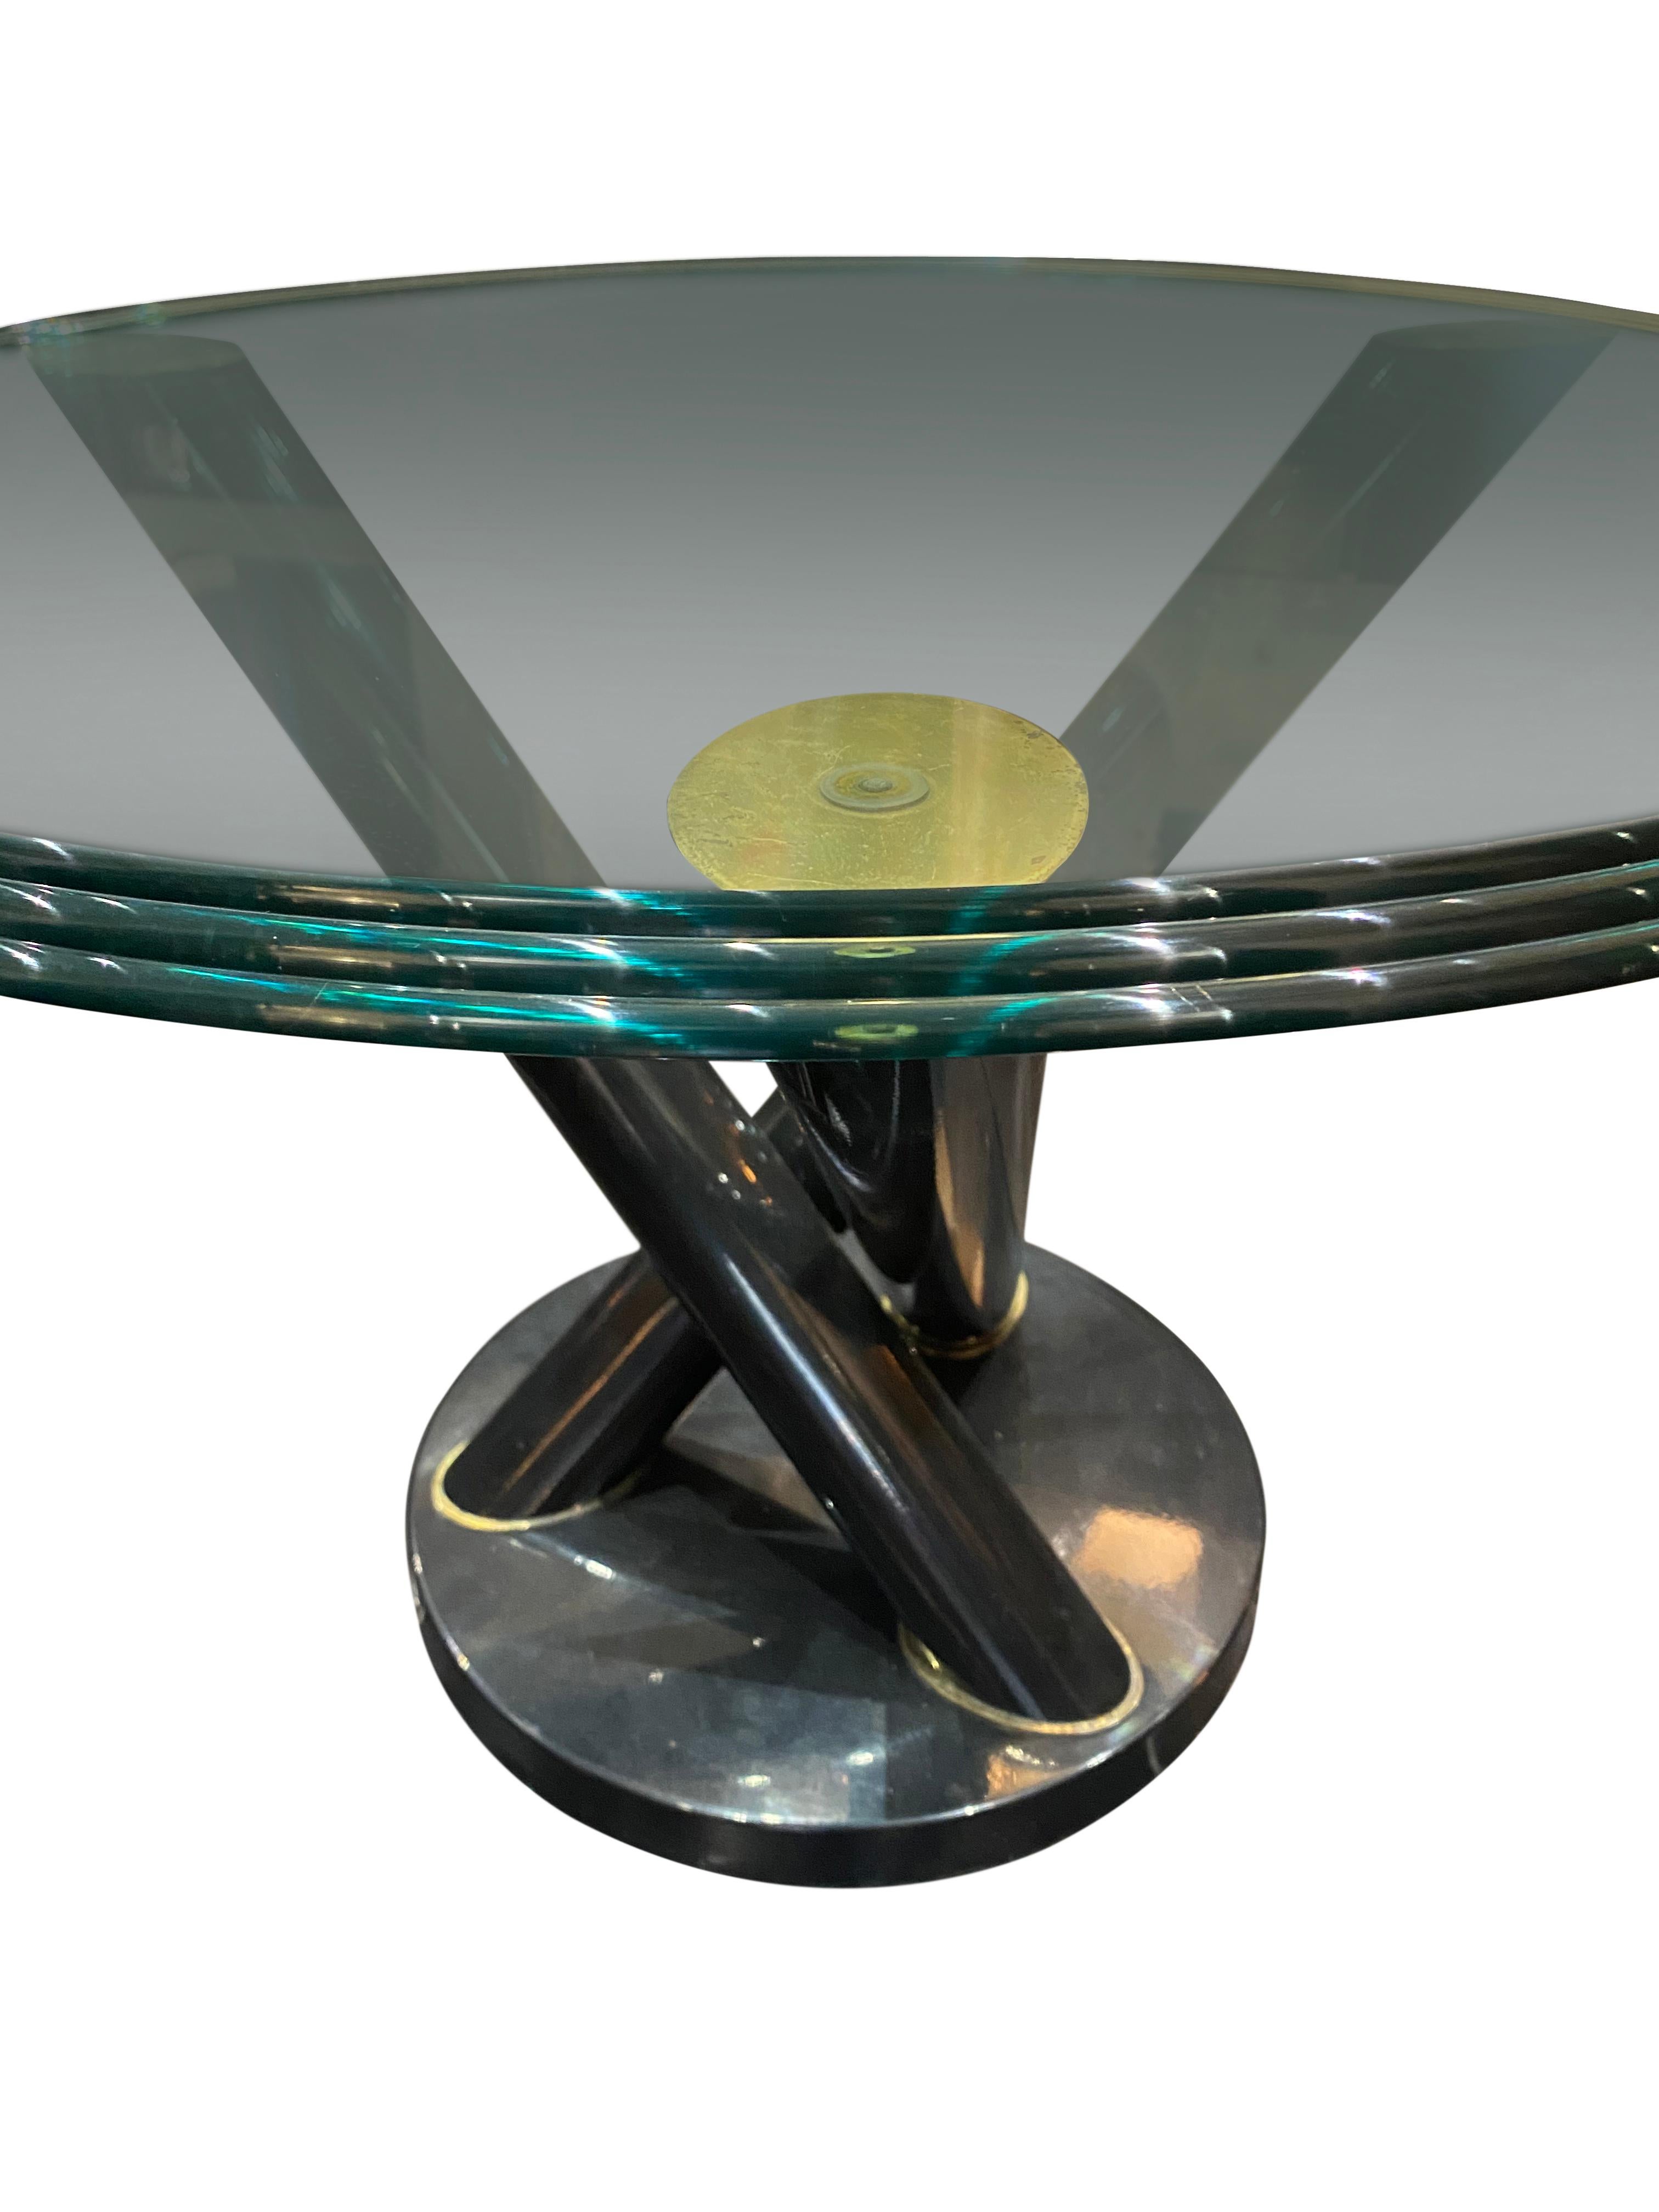 Beveled 1970s Italian Architectural Tripod Side Table For Sale